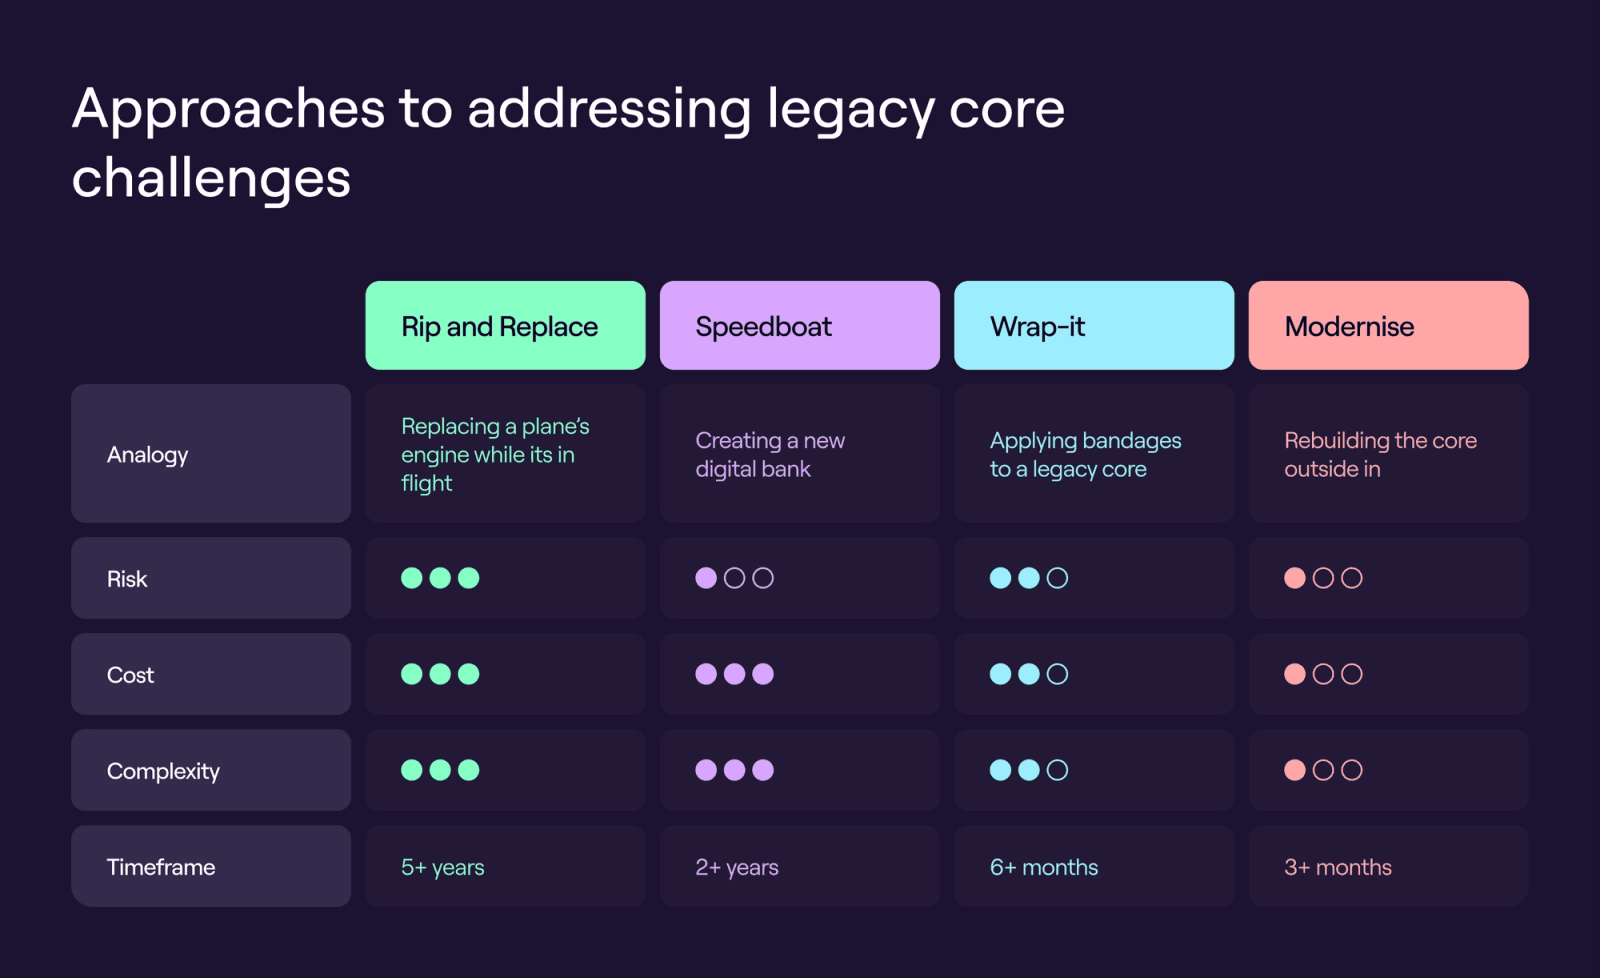 Approaches to addressing legacy core challenges